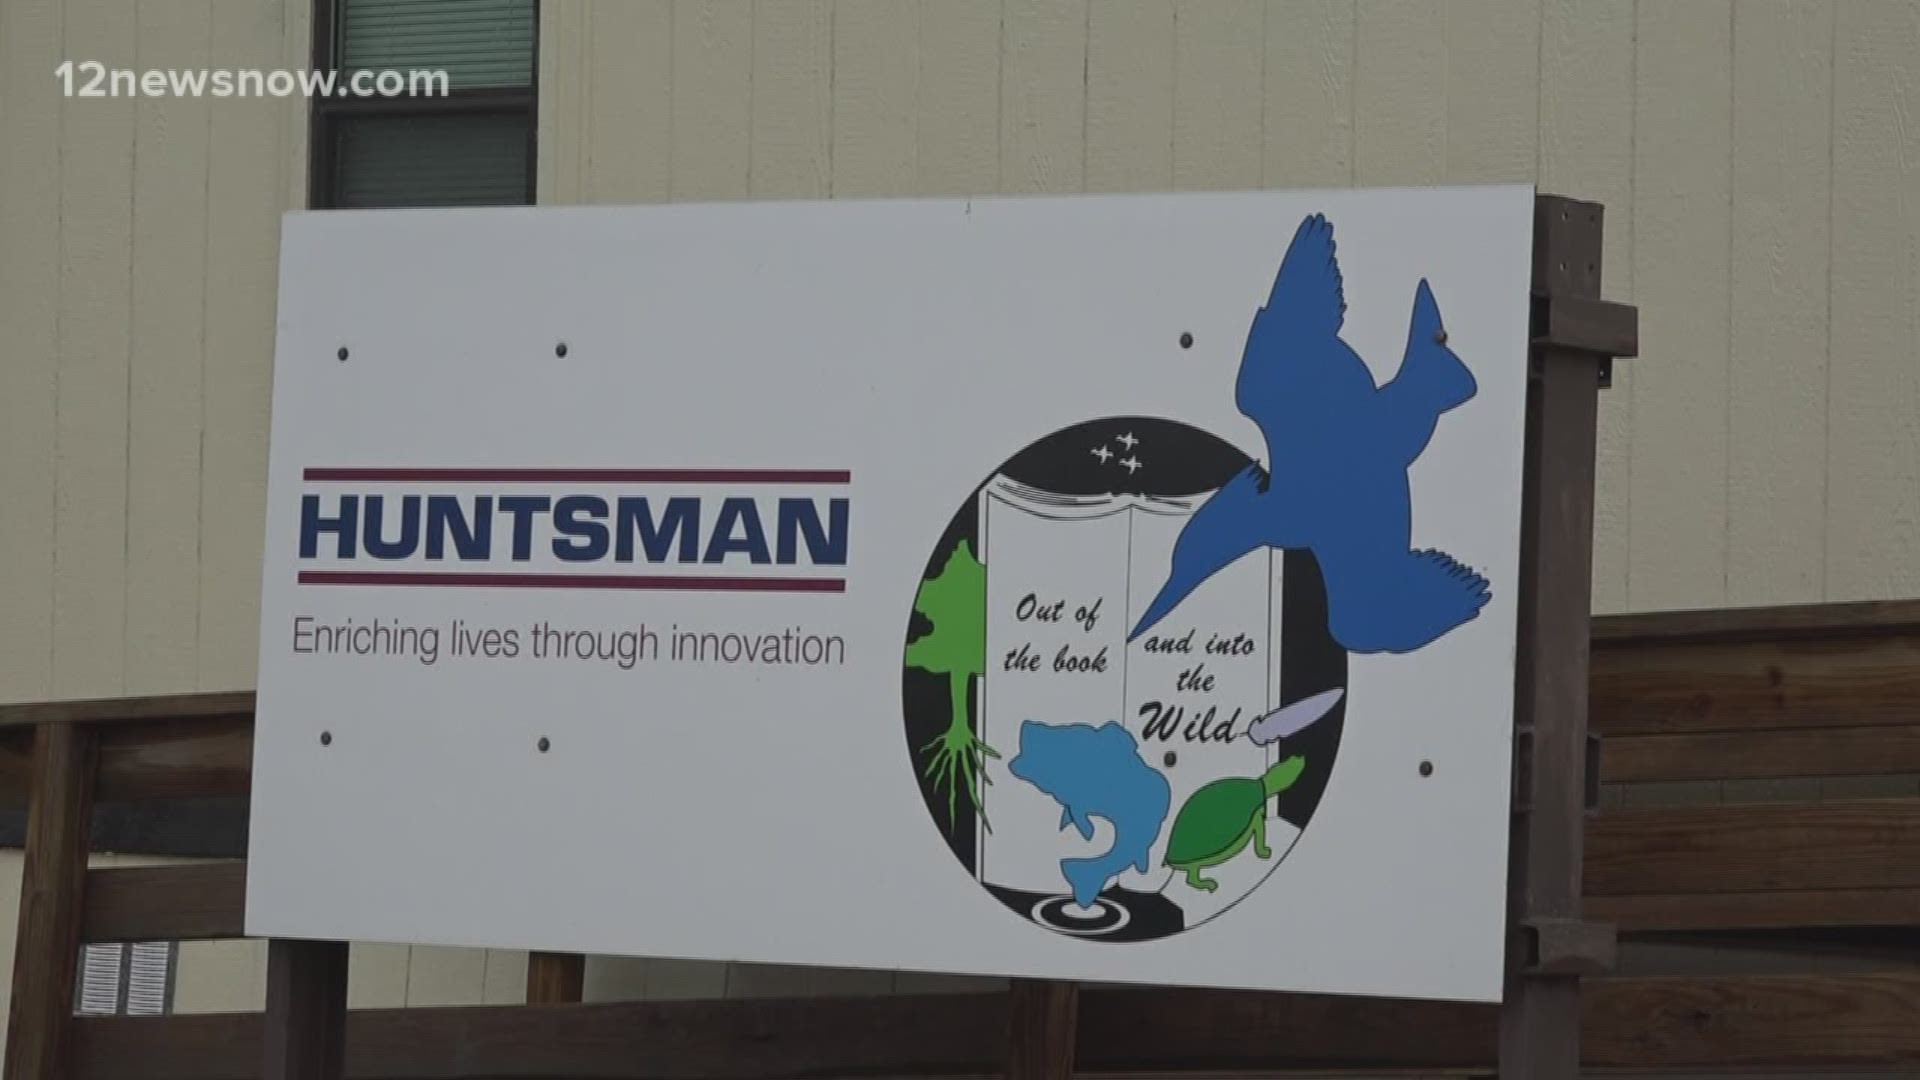 Huntsman's Environmental Education Center is one of its projects, and is used by STEM students from local schools.